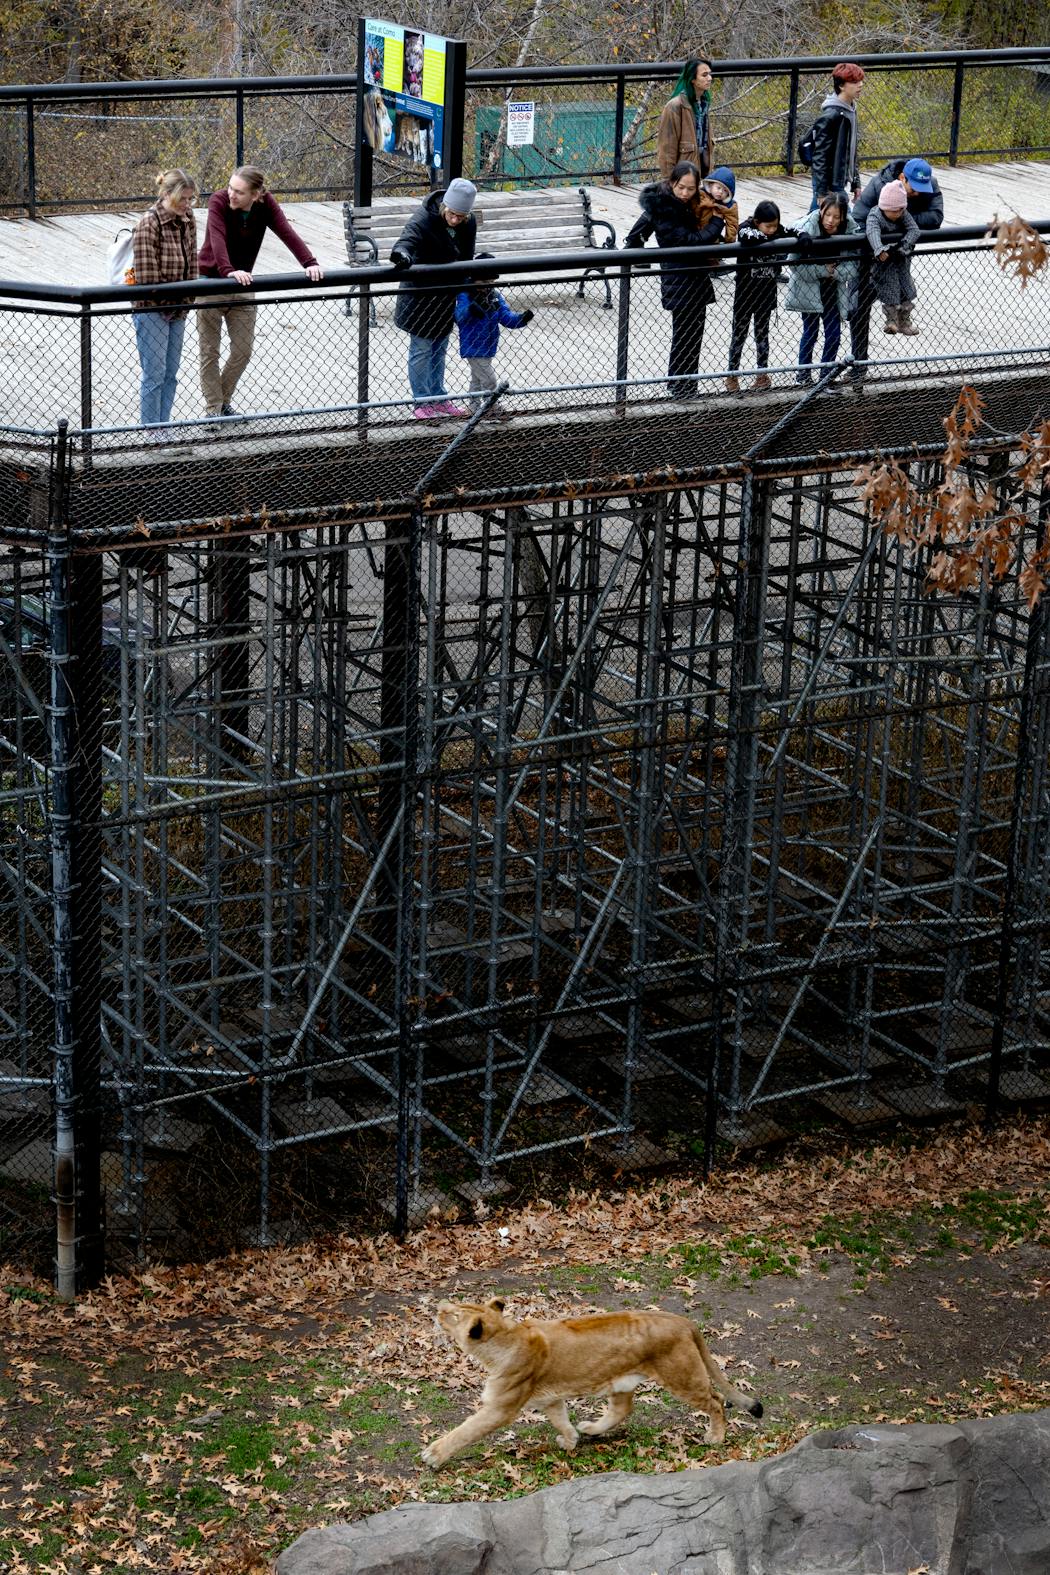 Patrons looked down at Maji in the lion enclosure Tuesday from a bridge built on temporary scaffolding at the Como Zoo in St. Paul.